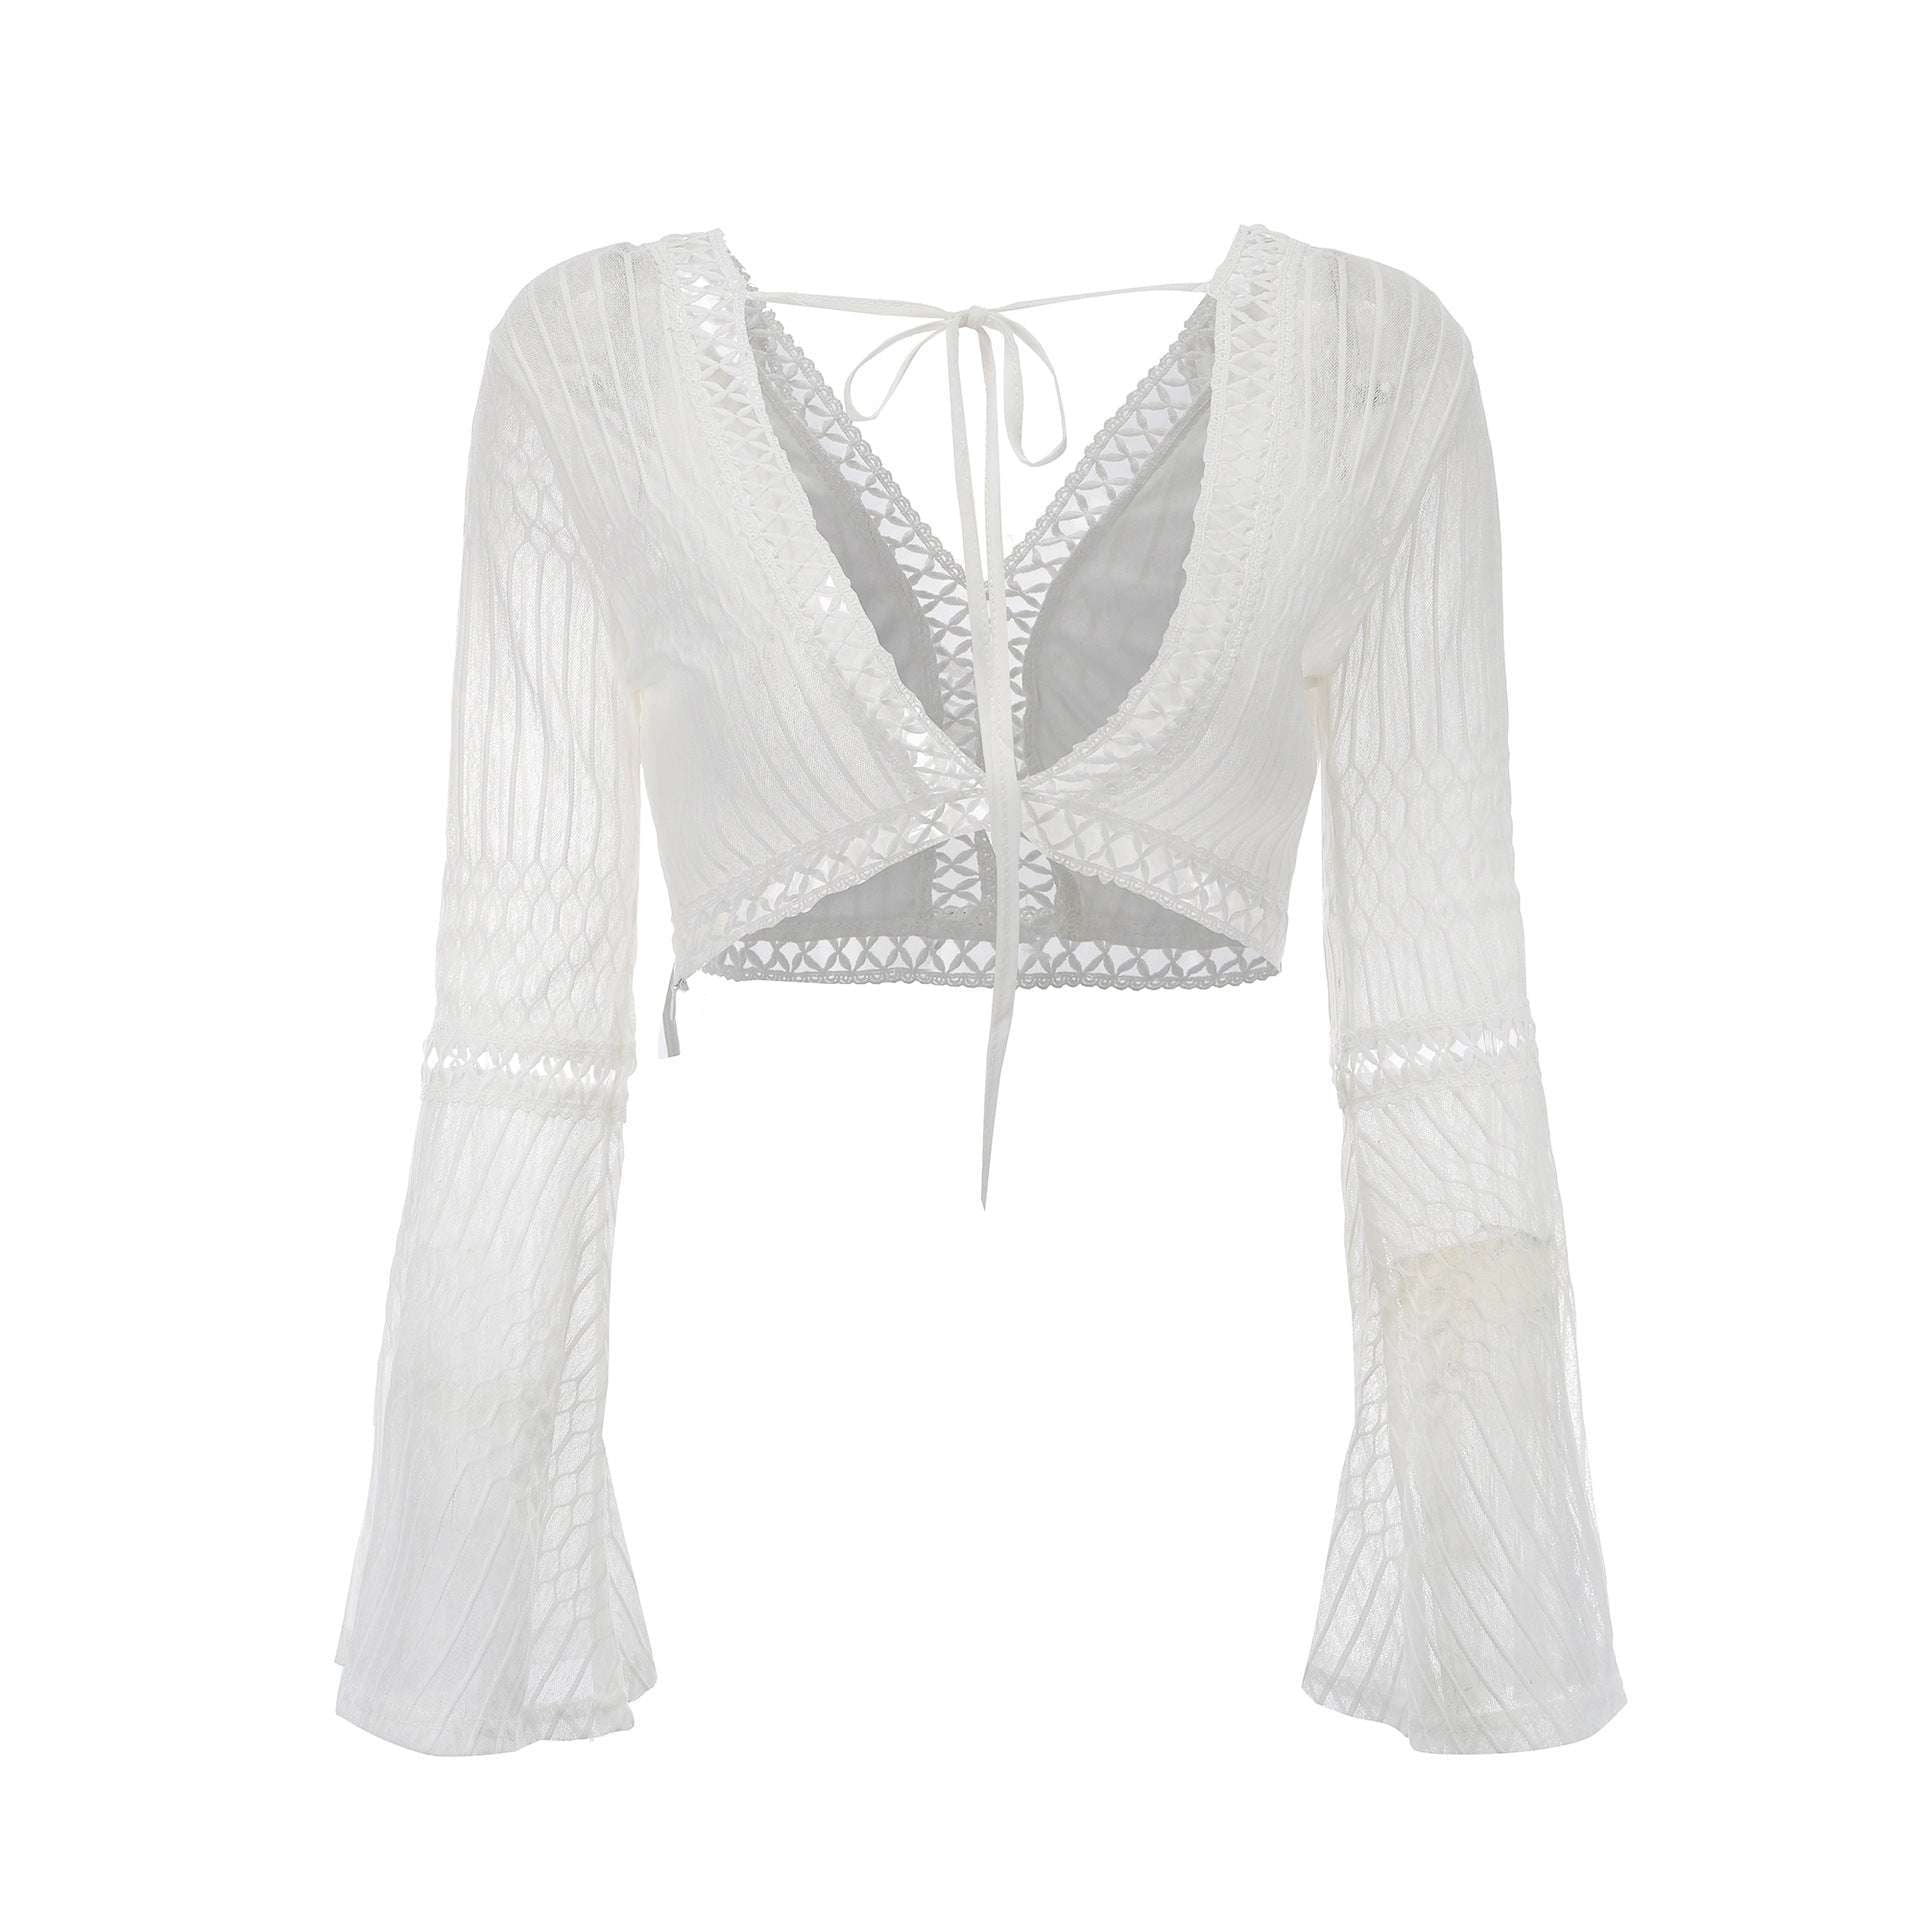 Elegant White Top, Floral Lace Blouse, Lace Cutout Top - available at Sparq Mart